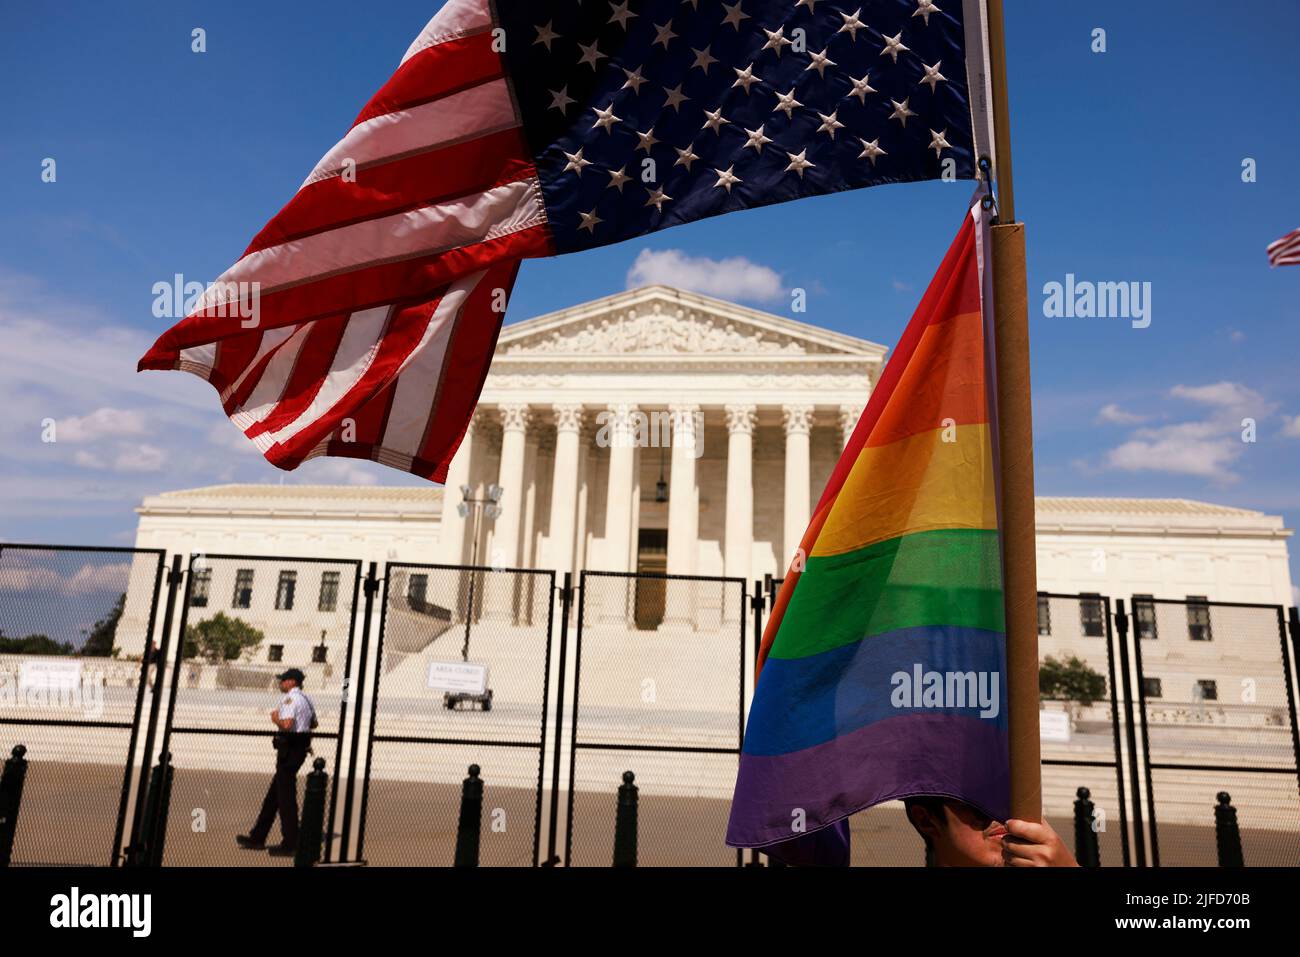 Washington, United States. 26th June, 2022. An American flag flies upside down next to a Pride flag outside the Supreme Court during a two day protest. More than 100 demonstrators gathered outside the Supreme Court of United States for an abortion rights rally. The rally comes one week after the Supreme Court of the United States issued its opinion in Dobbs v. Jackson Women's Health Organization which overturned Roe v. Wade and the right to abortion access. Credit: SOPA Images Limited/Alamy Live News Stock Photo